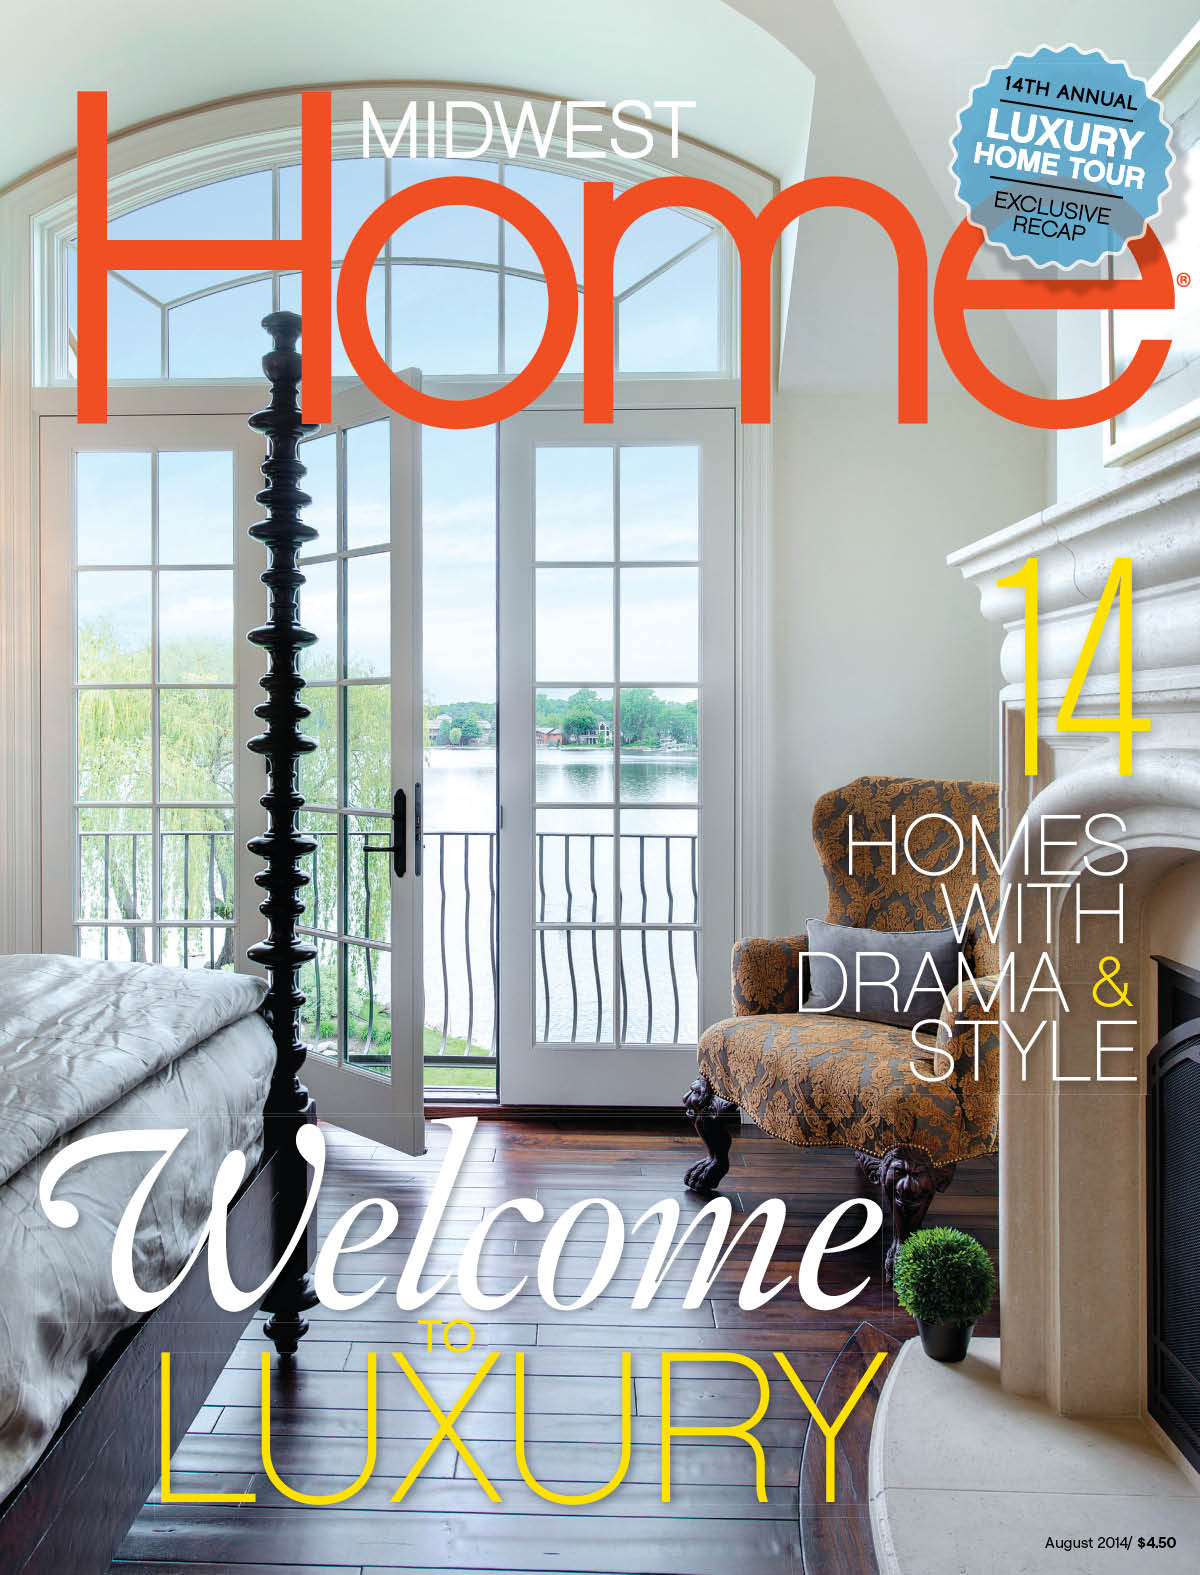 Midwest Home Magazine Cover for August 2014 with a luxury bedroom showing the end of a bed with a tall ornate bedpost and stone fireplace at the foot of the bed with white French doors opening up to a view of the lake. Th floors are dark oak and there is a light brown chair in the corner of the room.